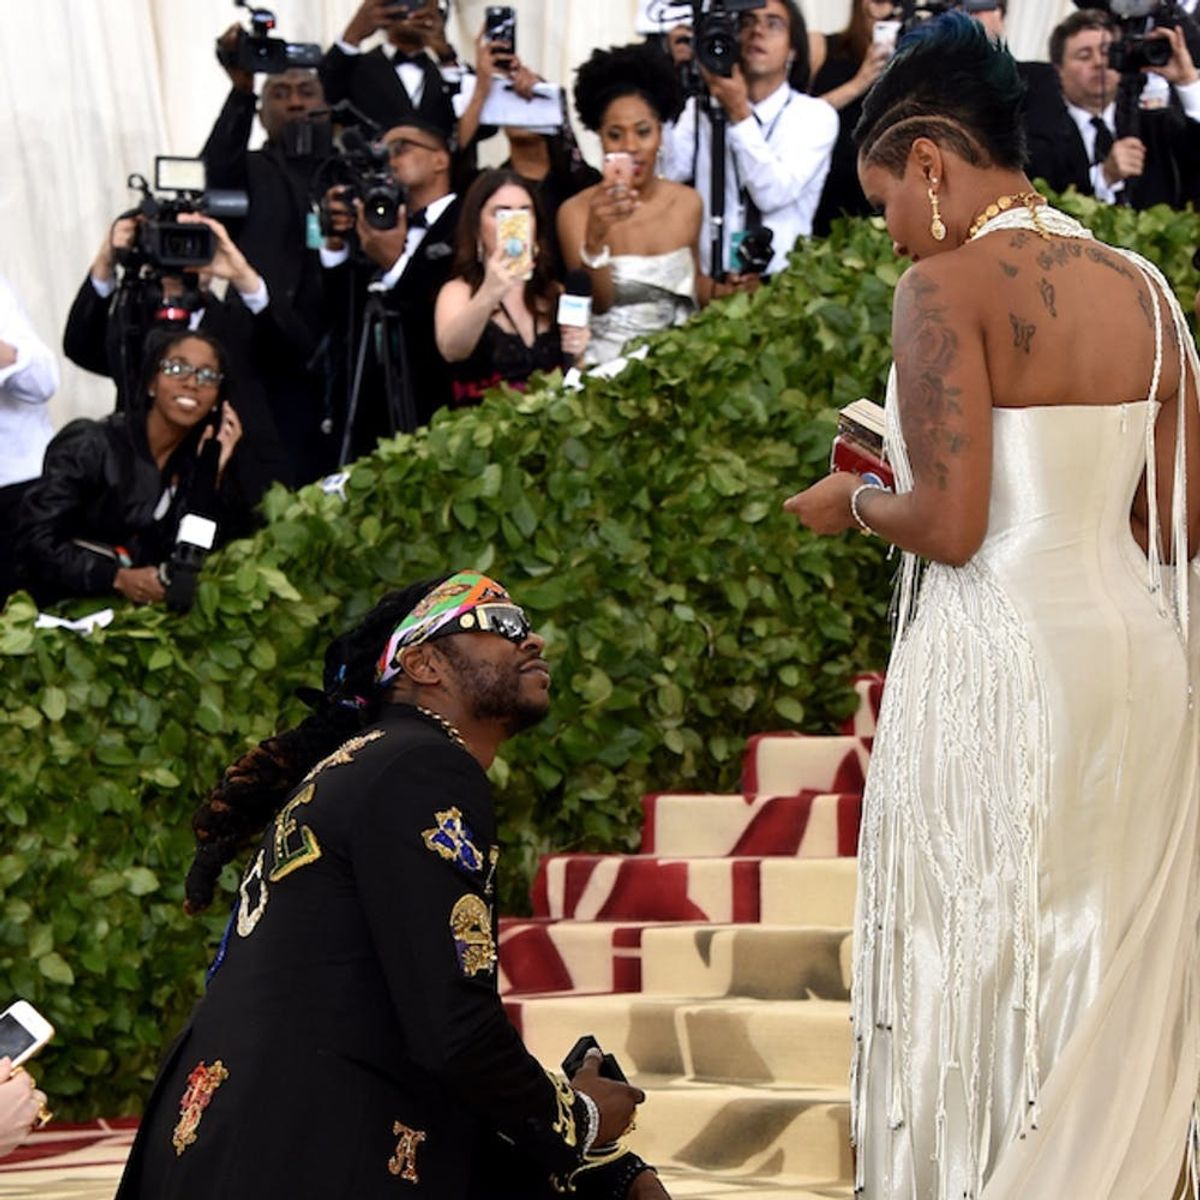 Met Gala 2018: Everyone Thinks 2 Chainz Just Proposed on the Red Carpet